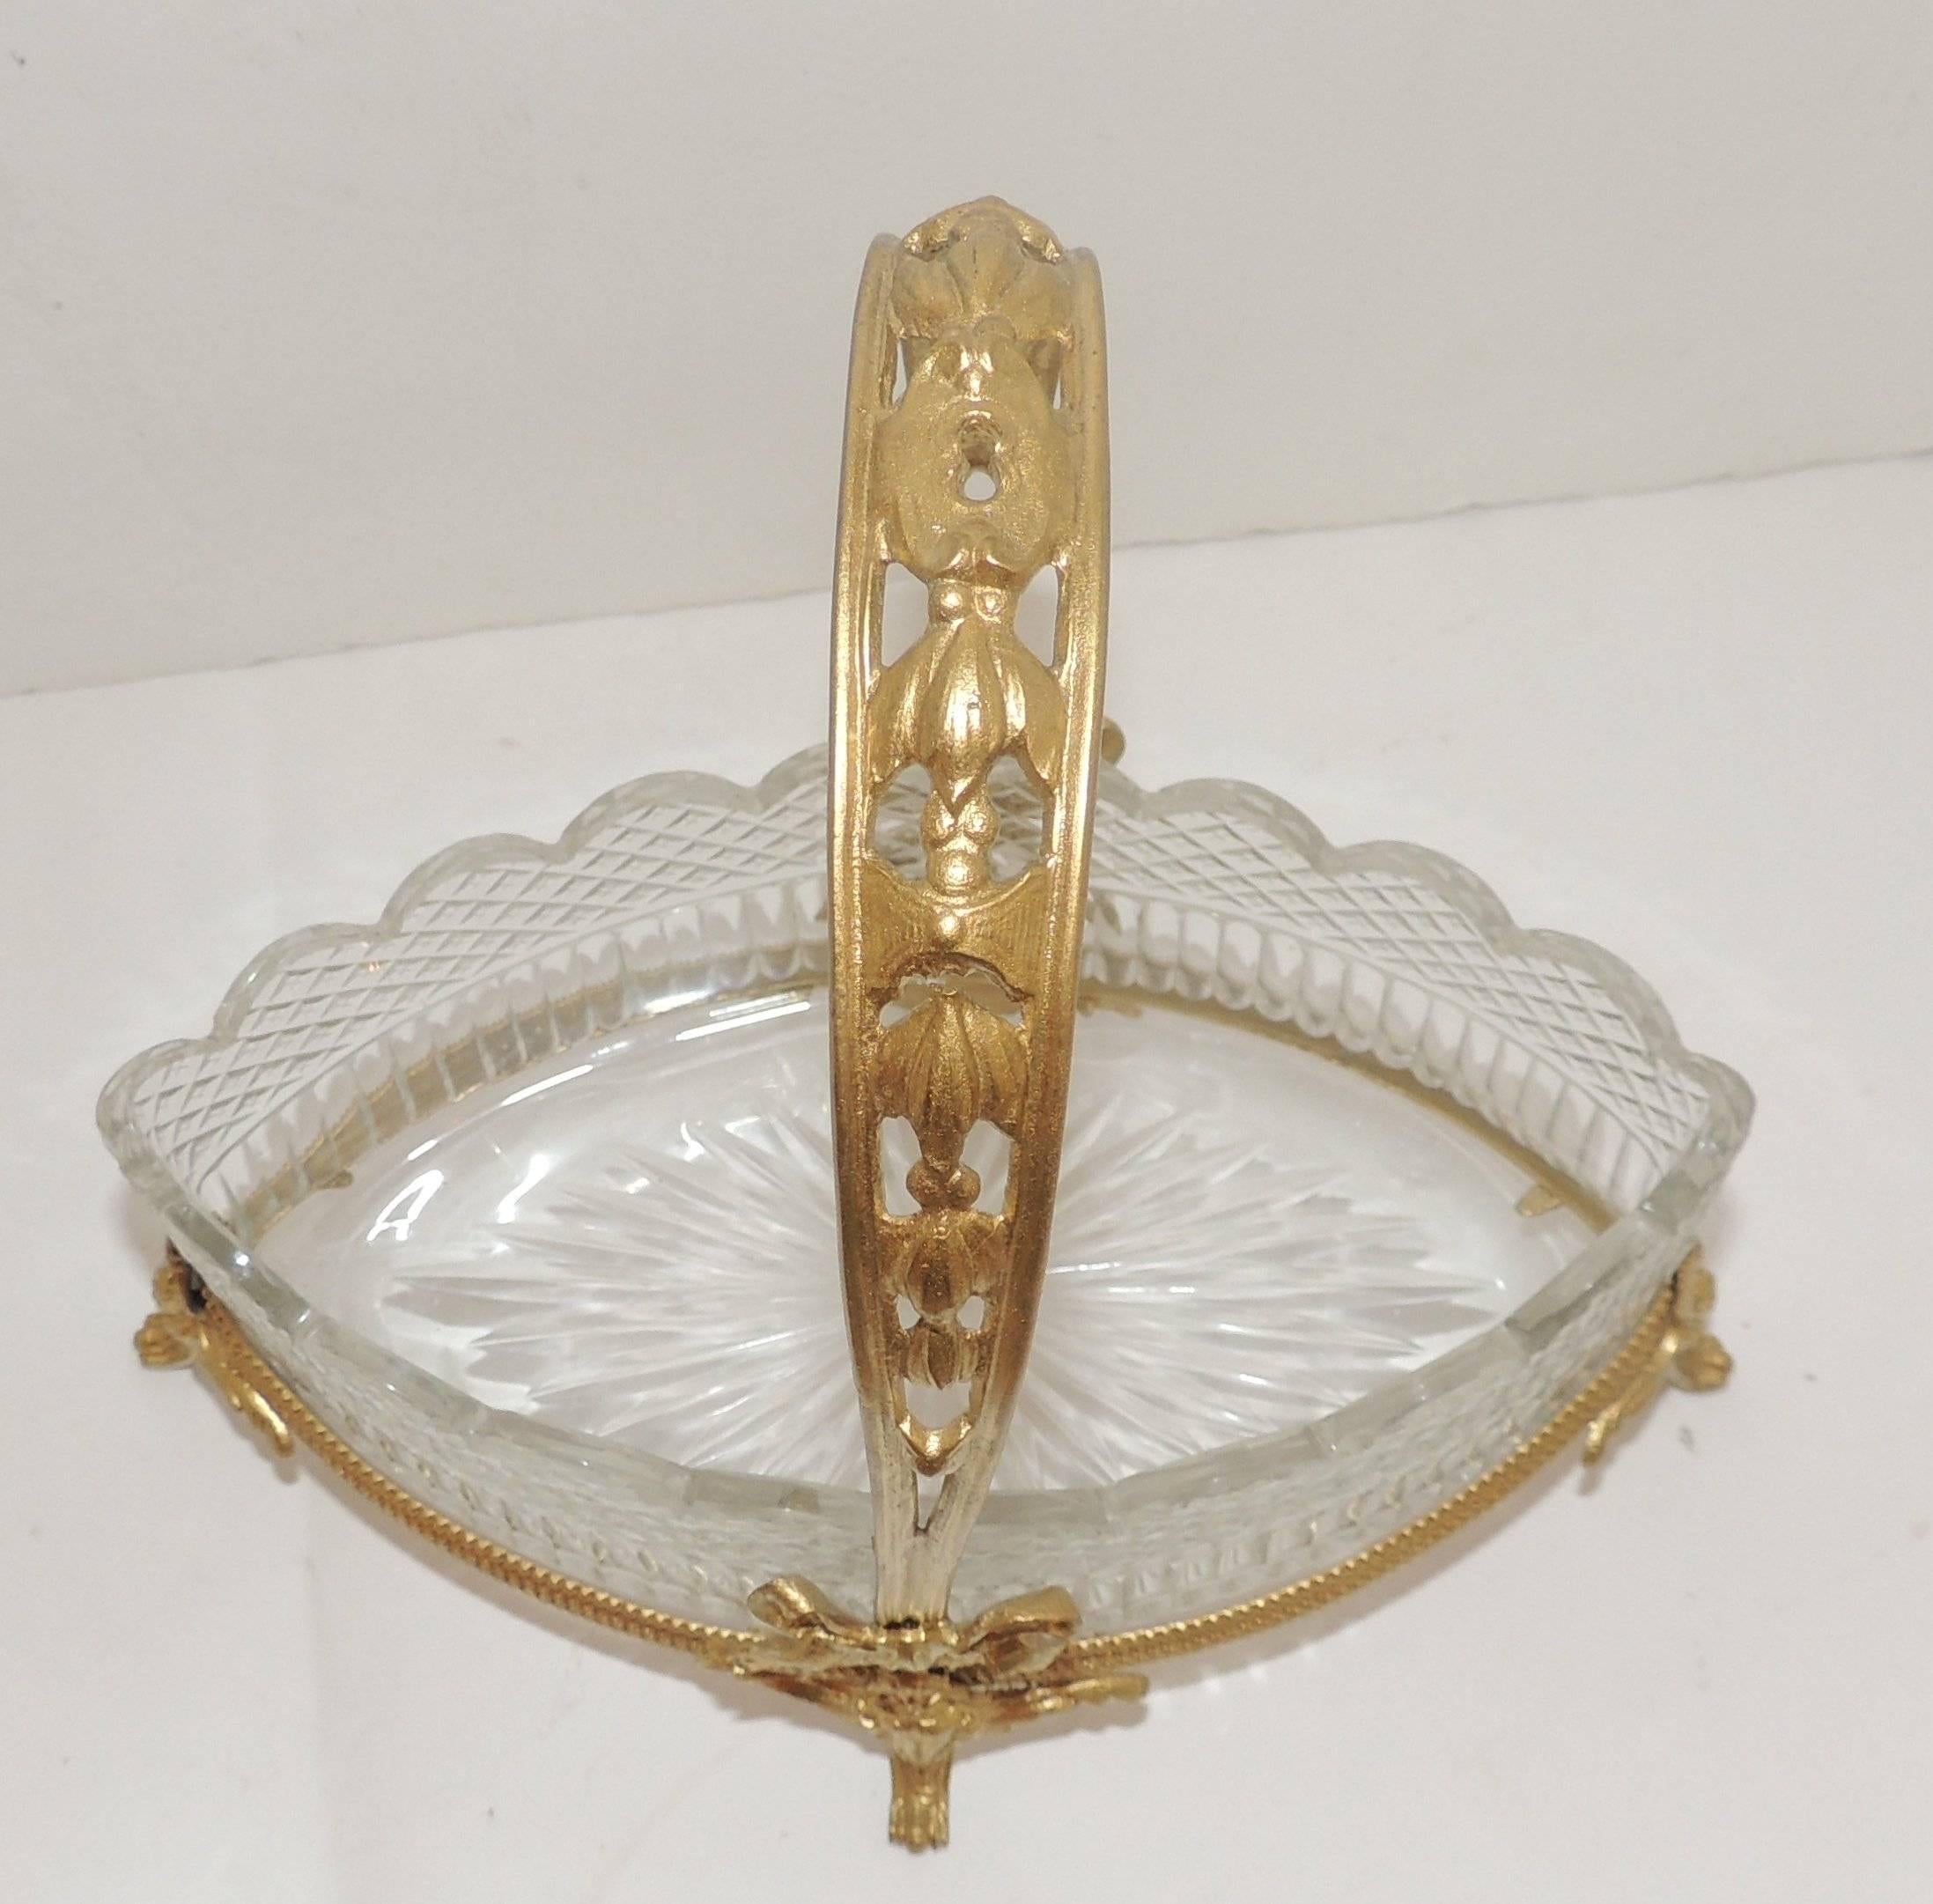 This beautiful diamond shaped crystal insert has a fluted bottom and cut crystal
border which is scalloped. The doré bronze basket is decorated with figural heads, fine etched details floral decorated handle and finished with gilt bows.

Insert: